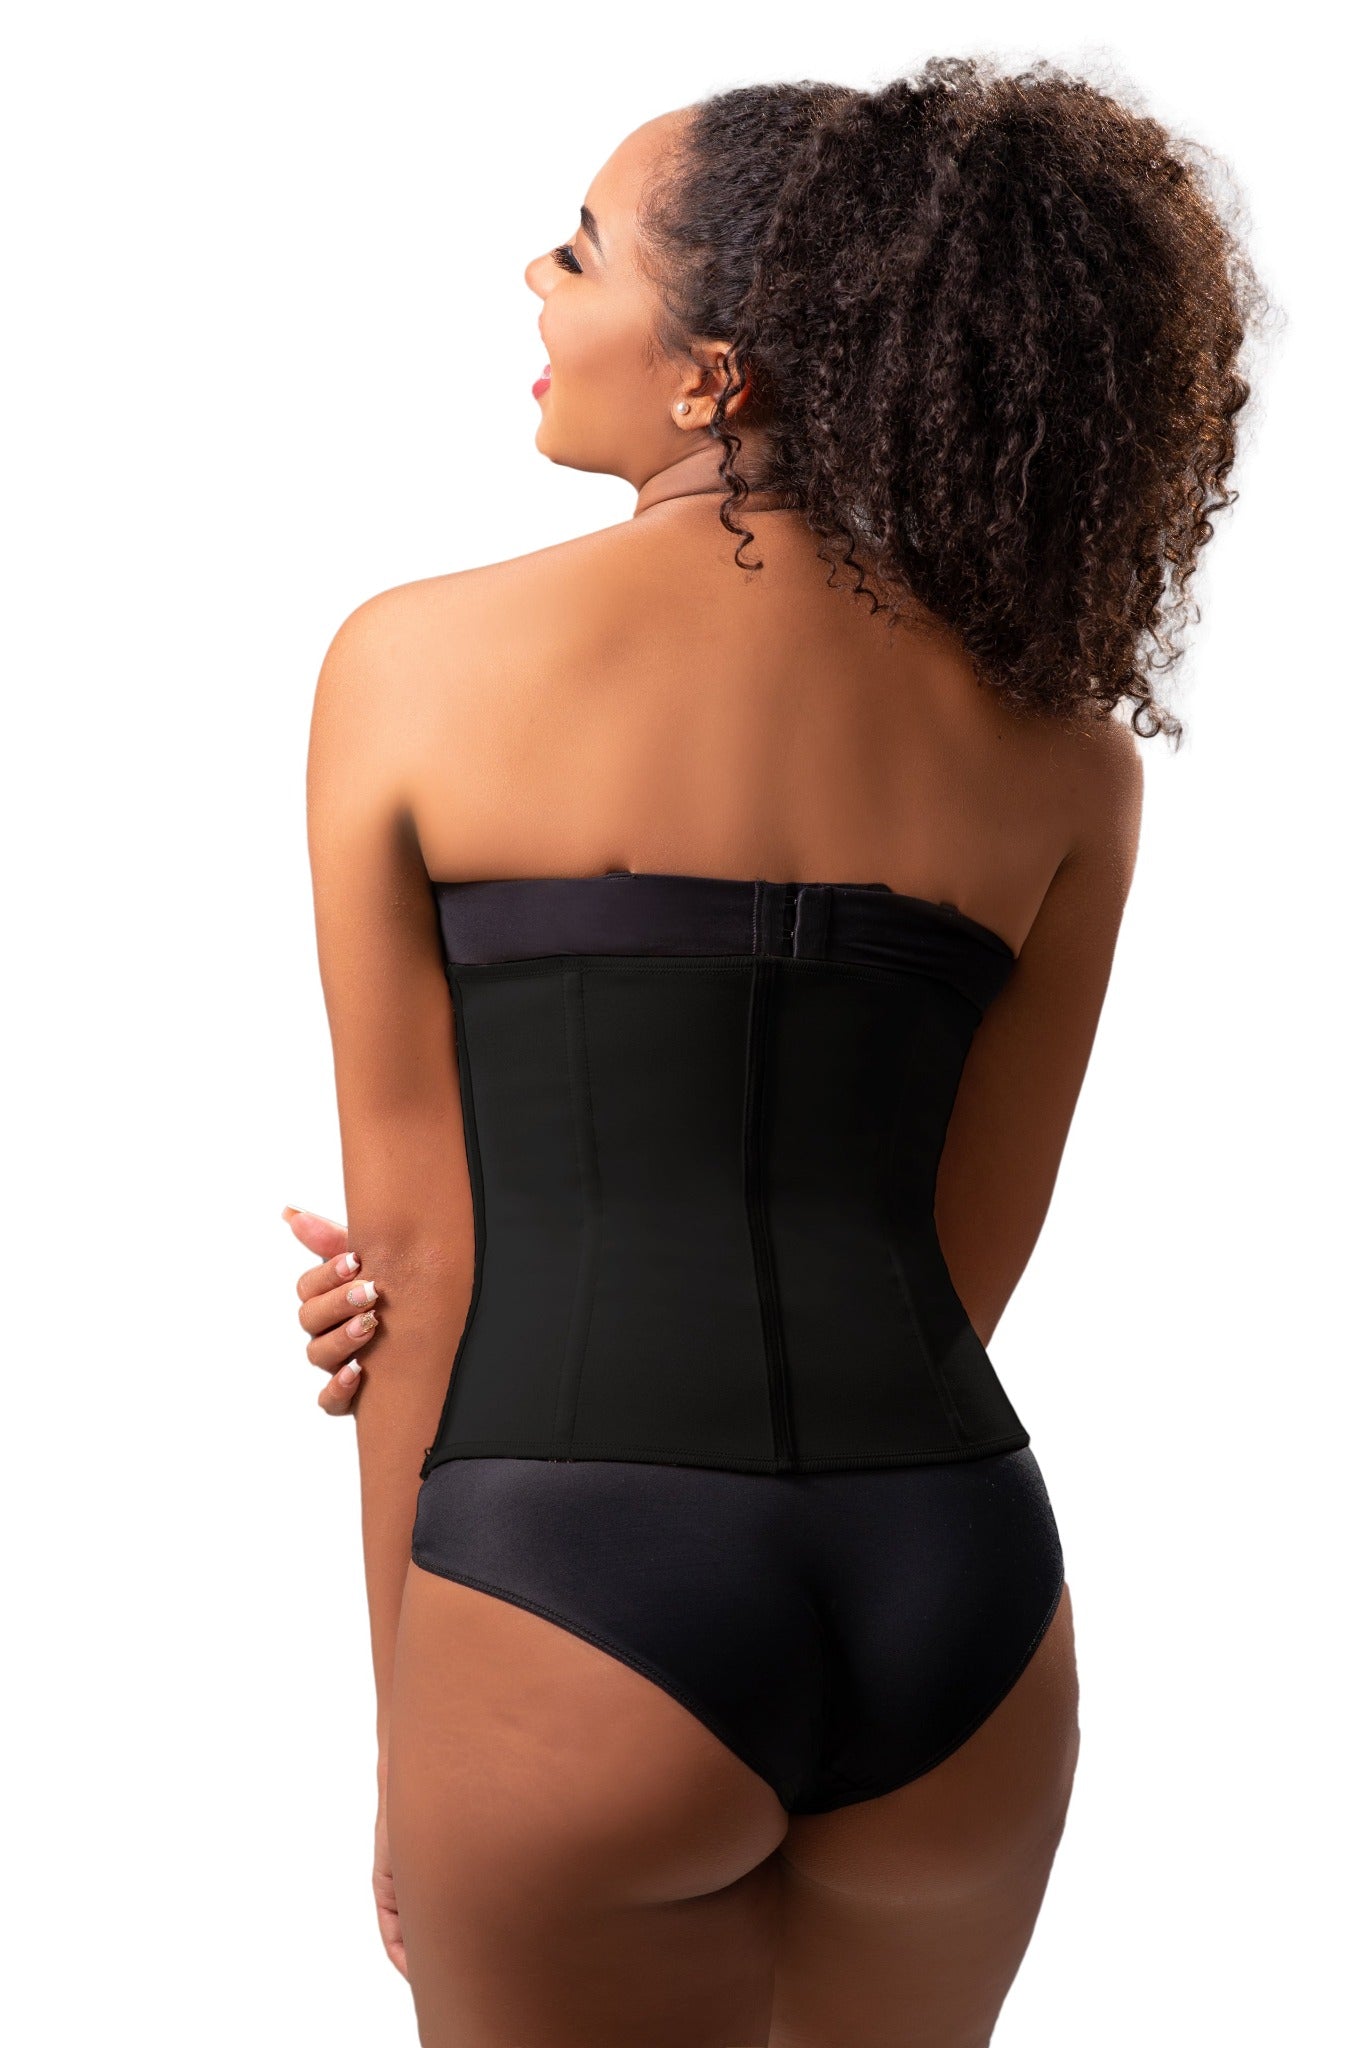 Vedette Gigi Firm Compresion Classic Girdle with Zipper 403